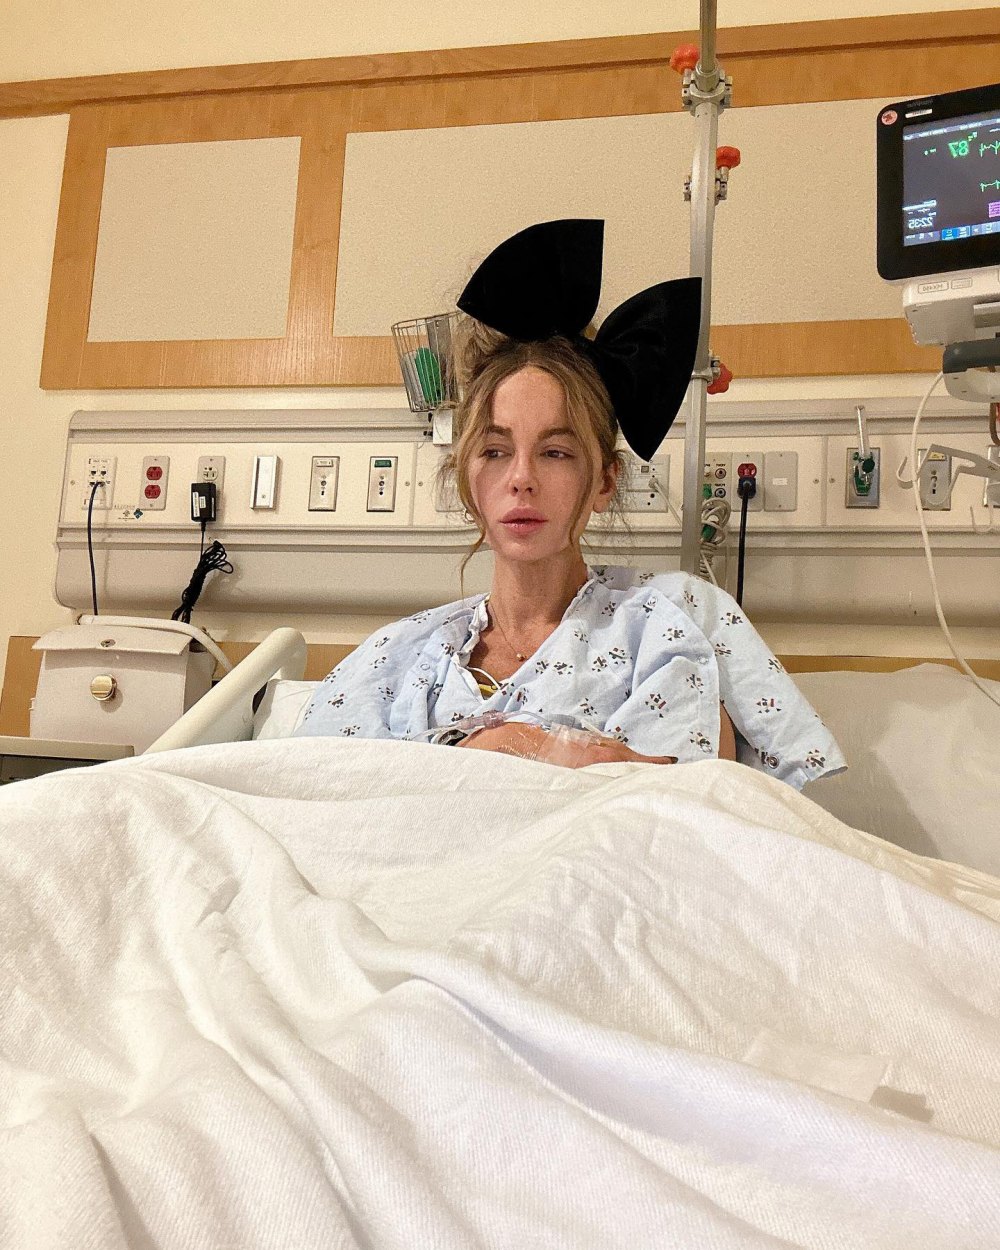 Kate Beckinsale Poses for Tearful Selfie in Hospital Bed